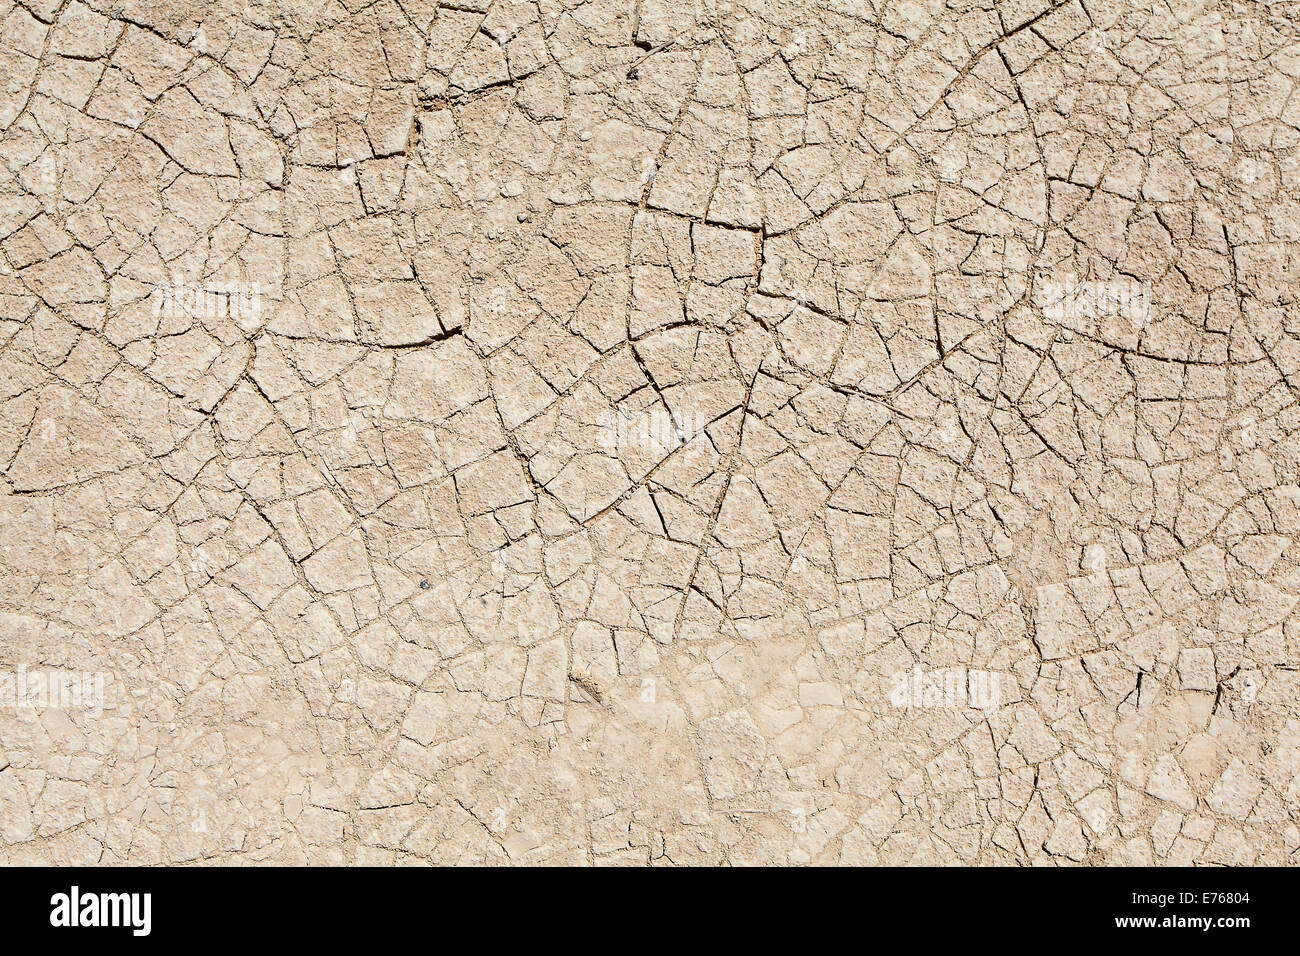 environmental concept, Water shortage and drought Dry cracked mud Stock Photo